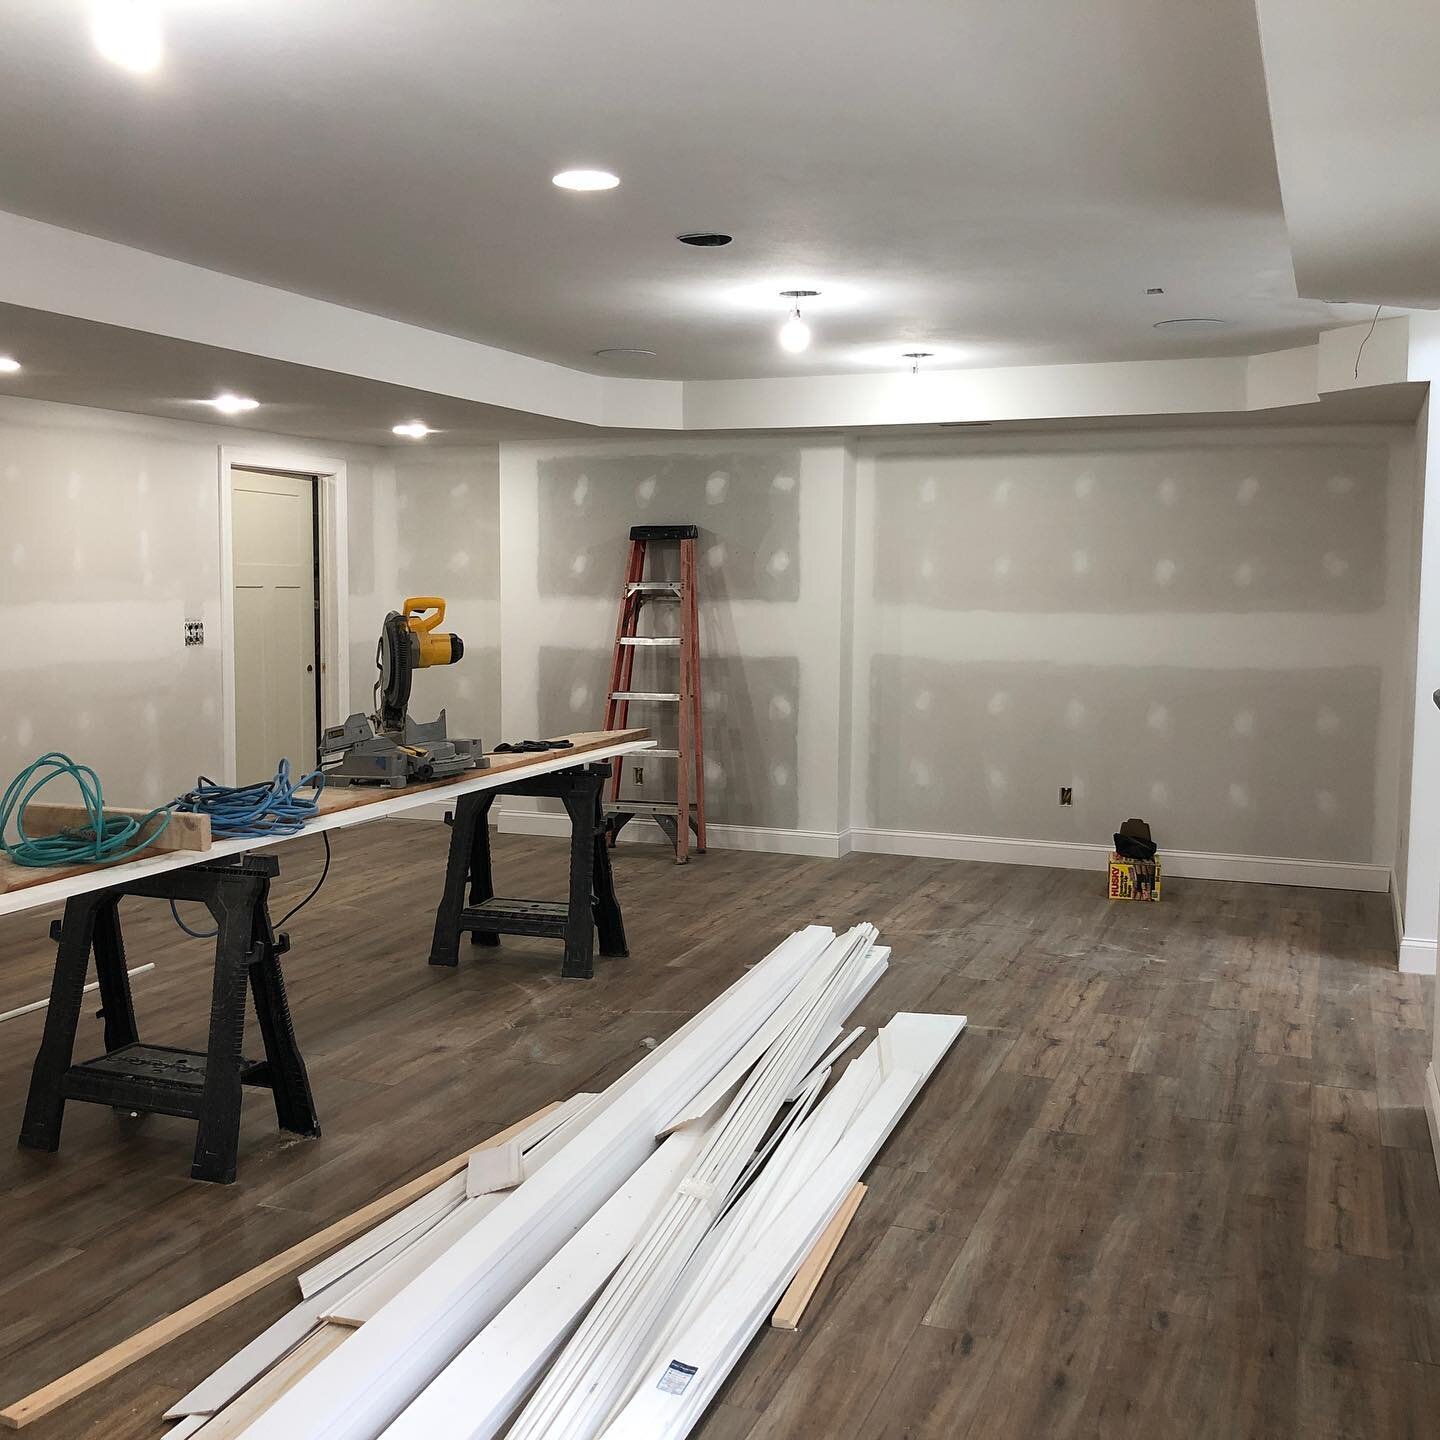 Custom pool house basement with walk out.  We are putting down the trim and vinyl plank flooring now that the drywall work is complete. Sonos and Truaudio indoor audio throughout.